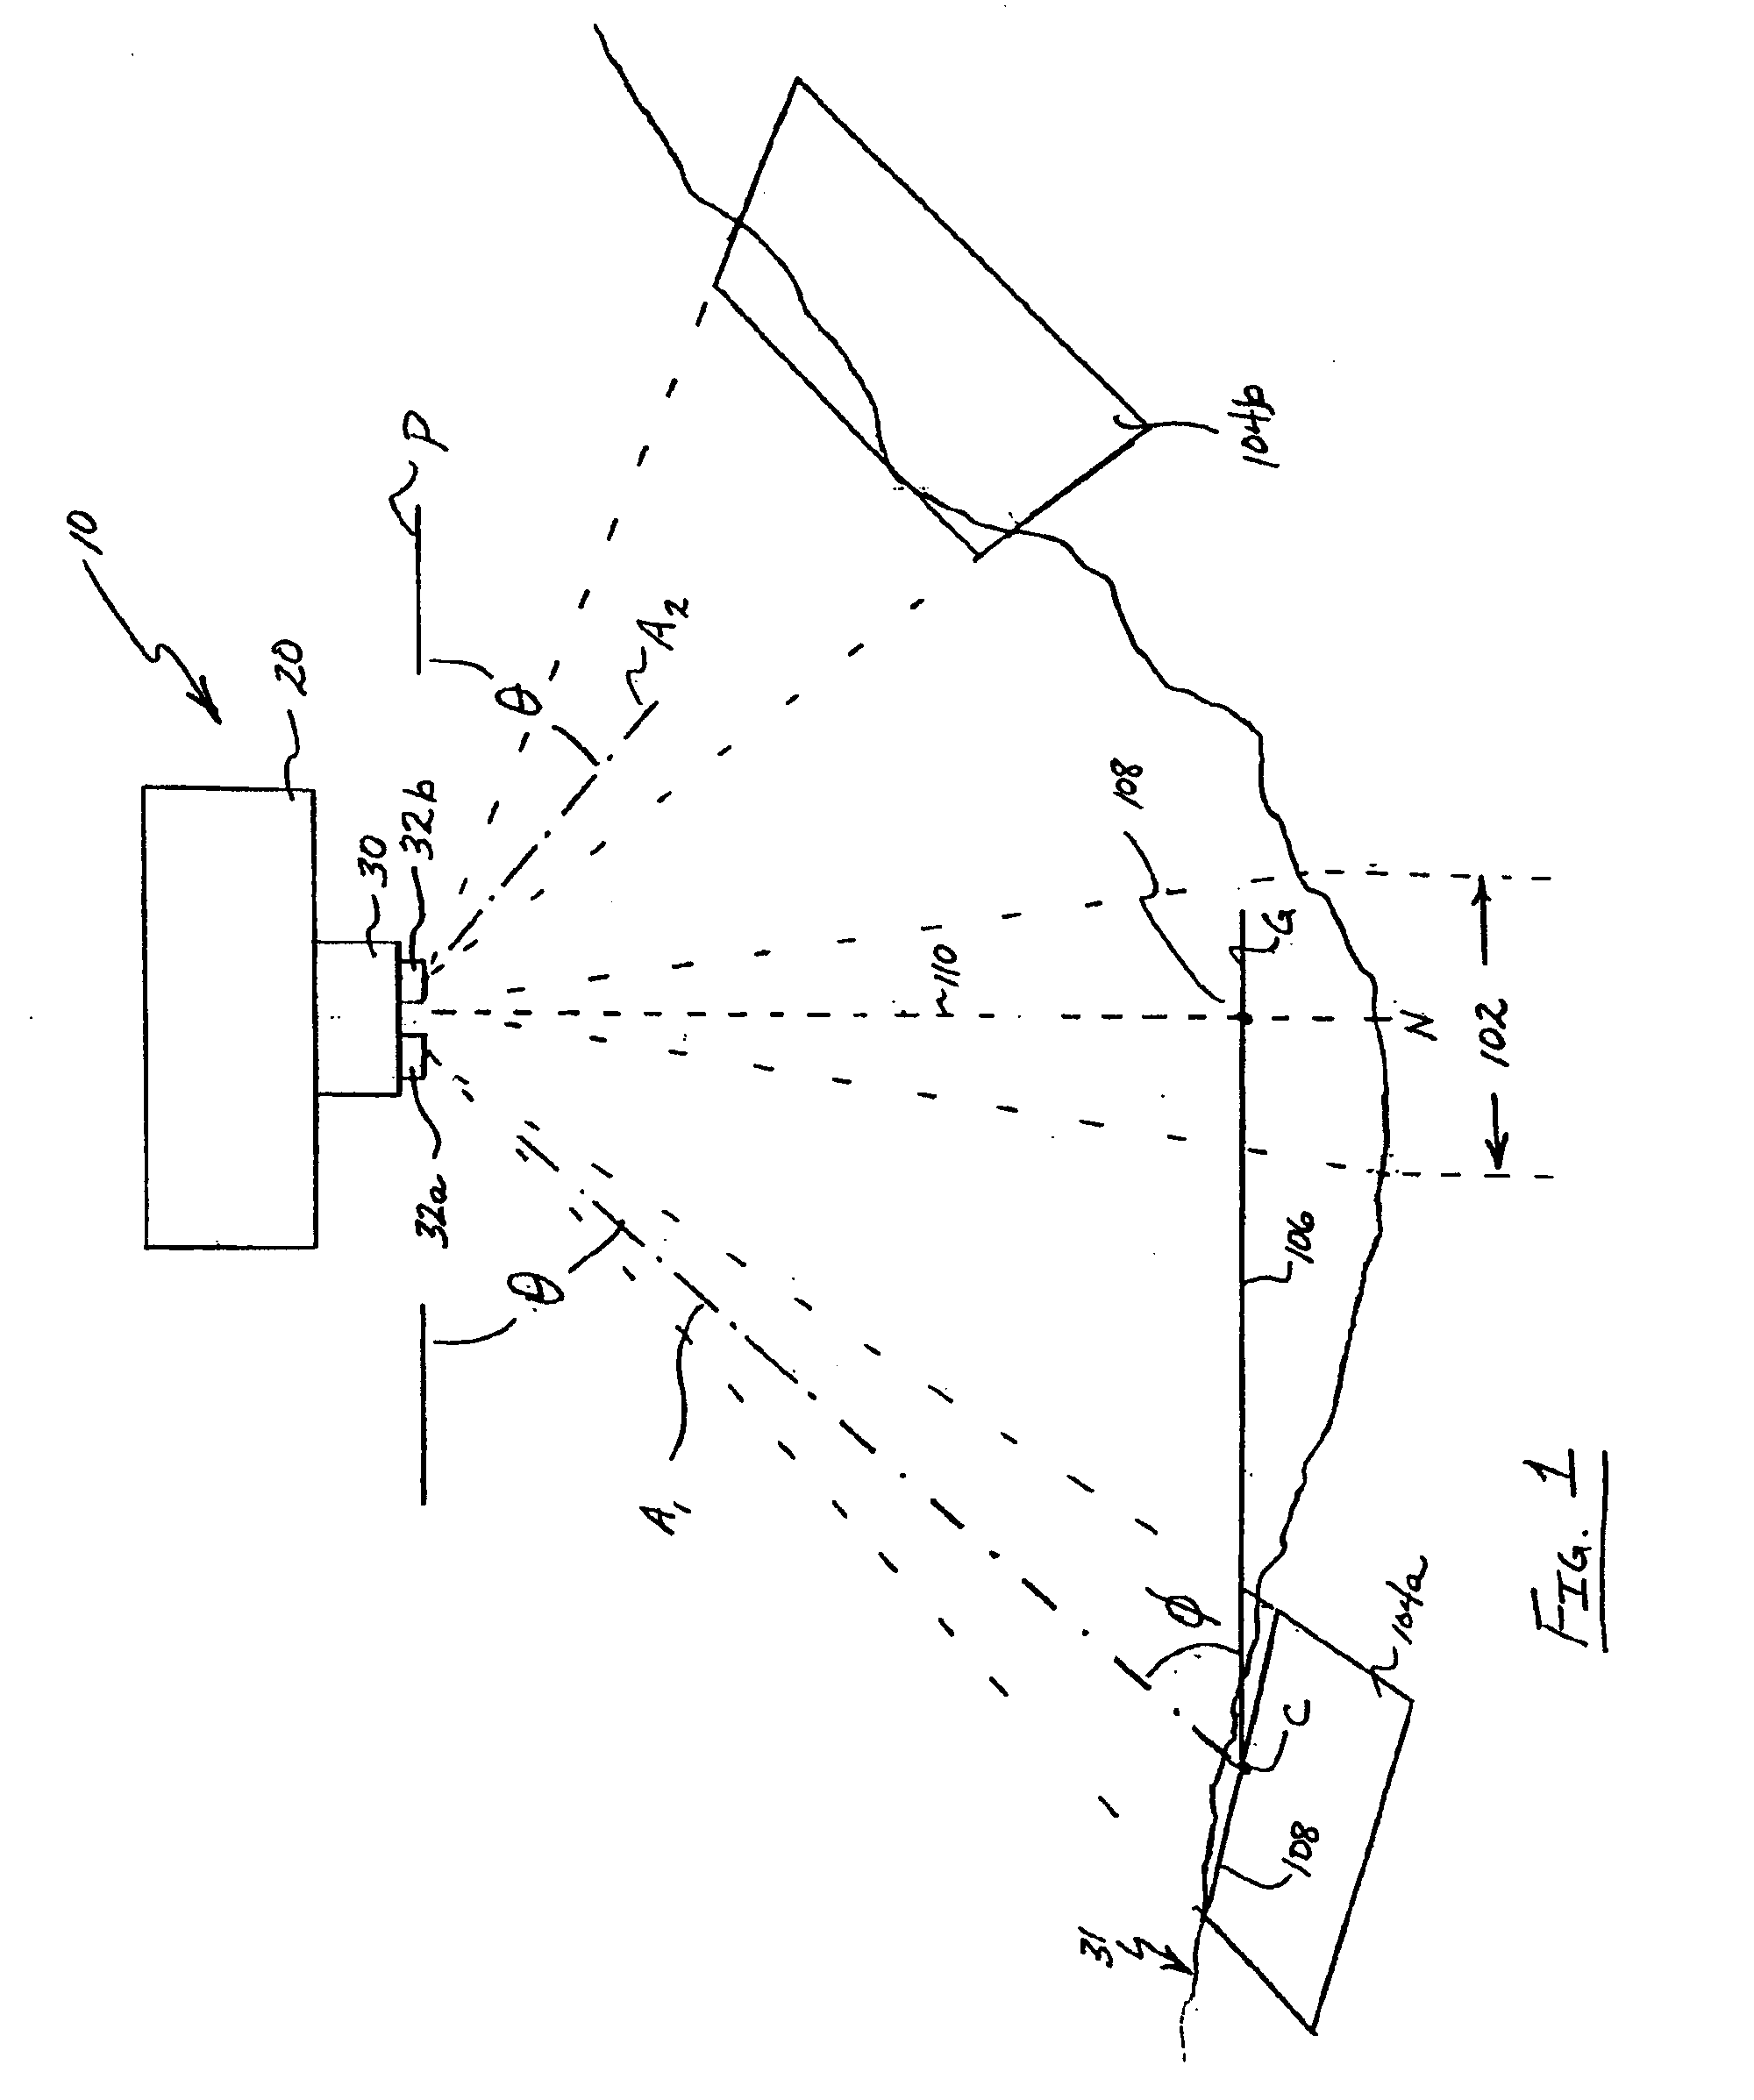 Method and Apparatus for Capturing, Geolocating and Measuring Oblique Images